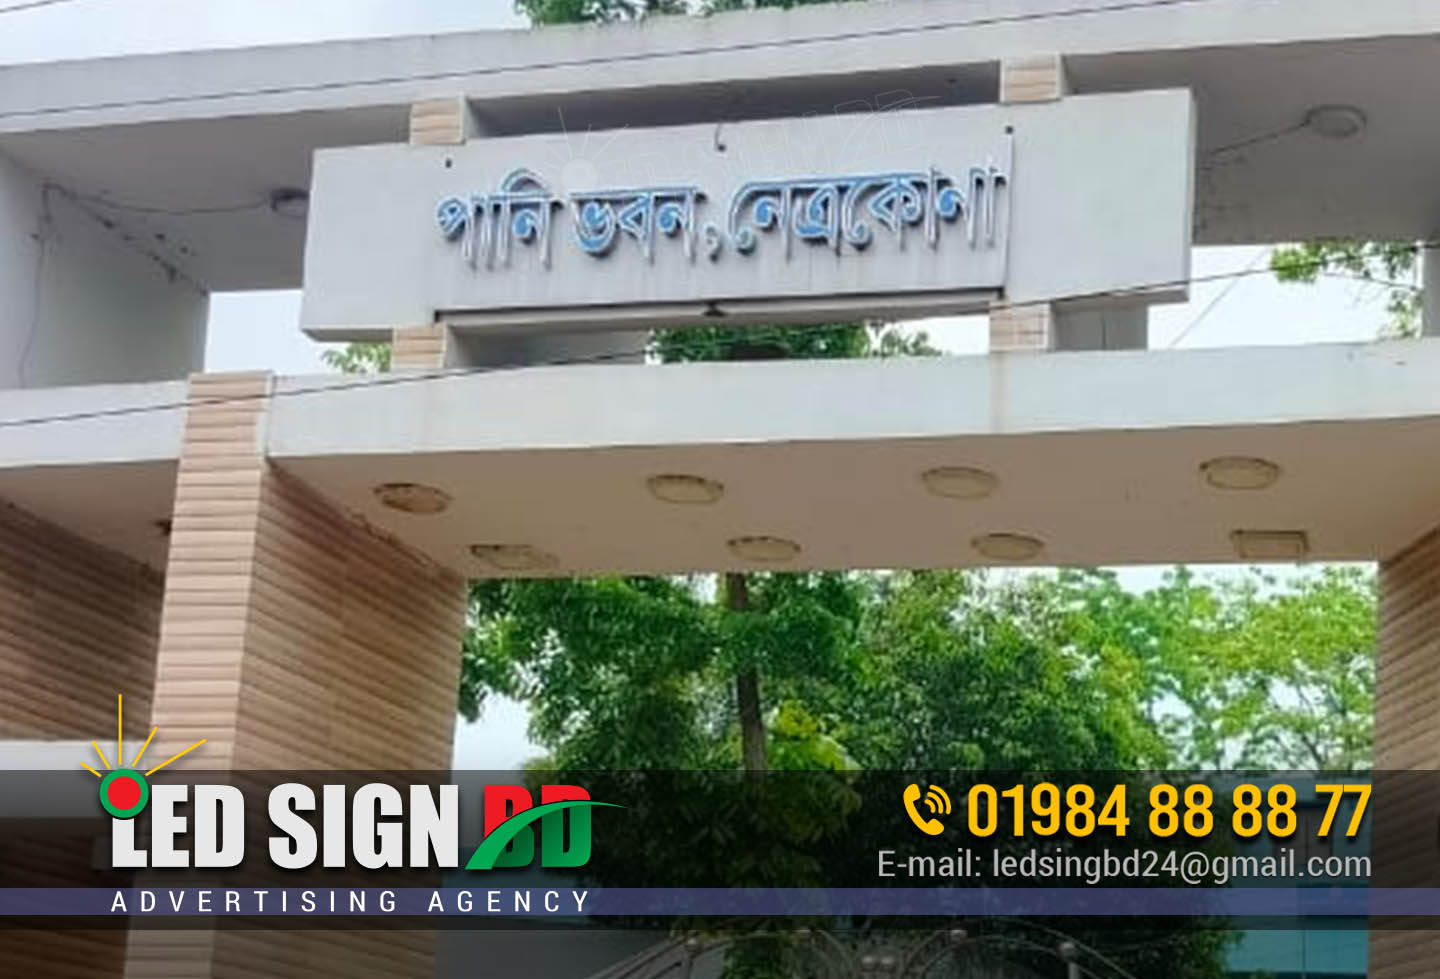 Stainless steel letter sign board making dhaka. Stainless steel letter sign board. Steel sign construction limited. Stainless steel letter board. Sign board design in bangladesh. Sign board dhaka. 3 stainless steel letter sign board making dhaka. 2 stainless steel letter sign board making dhaka. SS top letter bd pdf. SS top letter bd price. SS top letter bd font. SS top letter bd download. SS top letter bd pdf download. SS top letter bd. SS. steel limited bangladesh. SS steel ltd bd. SSB leather bd. Atylish name bd. Free fire name style 2020. Sign board price in bangladesh. PVC sign board price in bangladesh. Acrylic sign board price in bangladesh. Led sign board price in bangladesh. Neon sign board price in bangladesh. Sign board design in bangladesh. Digital sign board price in bangladesh. Lighting sign board price in bangladesh. Pvc sign board price in bangladesh. Plastic sign pvt ltd. Acrylic sign board price in bangladesh. Sign board design in bangladesh. Plastic association bangladesh. Plastic bottle sign. Golden ss. Golden stitch design ltd. SS gold letters. Golden stitch design limited. Golden line bd. Golden ss letter bd. Gold star shipping line bangladesh. Golden sons limited. Offset printing press machine price in banglades. Printing press price in bangladesh. Printing press bd. Dhaka printing press. Screen printing machine price in bangladesh. Digital printing company in bangladesh. Printing press services list. Printing & packaging company in bangladesh. Wall poster price in bangladesh. Wall poster bd. Printing press in bangladesh. 10 wall printing press in bangladesh. 2 wall printing press in bangladesh. Wall paper price in bangladesh. Wasa logo png. Wasa logo signboard and letter signboard. Wasa logo logo signboard * and letter signboard. Nameplate of house. Name plate design for home bangladesh. House name plate design in bangladesh. Building name plate design. Signage bd. Electronic sign board. Digital sign board in dhaka. Good sign bangladesh. Gigital display board price in bangladesh. Neon signboard. College sign board. Sign board dhaka. Signboard background color. Signboard bd. project sign board design. Letter sign board design. Sign board design in bangladesh. Letter board design. Government monogram bangladesh. Gov monogram.. Project signboard template. Gob logo png. Government project job. Government letter format in bangladesh. Gob logo. Neon sign price in bangladesh. Bangladesh neon sign. Led sign board in bangladesh. Led sign board price in bangladesh. Sign board design in bangladesh. pvc sign board price in bangladesh. Signage bd. Acrylic sign board price in bangladesh. Neon sign price in bangladesh. Bangladesh neon sign. Led sign board in bangladesh. Led sign board price in bangladesh. Sign board design in bangladesh. Neon sign board. ................................................................................ Signboard Advertising Agency in Dhaka Signboard Advertising Agency has been in business for over 20 years, serving the Dhaka community with high-quality signboard advertising. The agency is owned and operated by Mr. Shafiqul Alam, who has extensive experience in the signboard advertising industry. Signboard Advertising Agency offers a wide range of services, including design, fabrication, installation, and maintenance of signboards. The agency has a team of highly skilled and experienced professionals who are dedicated to providing the best possible service to their clients. The Signboard Advertising Agency is committed to providing its clients with the highest quality signboard advertising solutions. The agency’s team of experienced professionals is dedicated to providing the best possible service to its clients. The Signboard Advertising Agency has a reputation for providing high-quality signboard advertising solutions at a reasonable price. 1. What is Signboard Advertising Agency? 2. What services does Signboard Advertising Agency offer? 3. What are the benefits of Signboard Advertising Agency? 4. How does Signboard Advertising Agency work? 5. Why choose Signboard Advertising Agency? 1. What is Signboard Advertising Agency? A signboard advertising agency, also known as an outdoor advertising agency, is a company that specializes in creating, planning, and executing outdoor advertising campaigns. Signboard advertising agencies are experts in understanding how to use various outdoor advertising formats to achieve a client's marketing objectives. While the term "signboard advertising agency" is most commonly used to refer to companies that specialize in outdoor advertising, there are also a number of full-service advertising agencies that offer outdoor advertising as one of their many services. In these cases, the outdoor advertising team within the agency works collaboratively with other teams, such as the media buying team, to ensure that the client's overall marketing objectives are met. If you're considering working with a signboard advertising agency to help promote your business, there are a few things you should keep in mind. First, it's important to find an agency that has experience planning and executing successful outdoor advertising campaigns. Second, you'll want to make sure that the agency you work with has a good understanding of the different types of outdoor advertising formats and knows how to use them effectively. And finally, you'll want to choose an agency that you feel comfortable working with and that you can trust to provide honest and objective feedback about your campaigns. 2. What services does Signboard Advertising Agency offer? Signboard Advertising Agency is a full-service advertising agency that offers a wide range of services to its clients. The agency has a team of experienced professionals who are experts in various fields of advertising and marketing. The agency provides comprehensive services that include market research, media planning and buying, creative development, and production. The agency has a wide range of experience in handling different types of advertising campaigns. It has worked with a number of leading brands and has successful campaigns to its credit. The agency prides itself on its ability to understand the client’s needs and create effective campaigns that deliver results. The agency offers a complete package of services that are designed to meet the specific needs of the client. The services offered by the agency include market research, media planning and buying, creative development, production, and post-production. The agency has a team of experienced professionals who are experts in different fields of advertising and marketing. The agency has a wide range of experience in handling different types of advertising campaigns. It has worked with a number of leading brands and has successful campaigns to its credit. The agency prides itself on its ability to understand the client’s needs and create effective campaigns that deliver results. 3. What are the benefits of Signboard Advertising Agency? There are many benefits of Signboard Advertising Agency. The first benefit is that it helps to create brand awareness. A well-designed signboard will attract attention and help to create a memorable impression of your business. It can also help to build brand recognition, making it easier for potential customers to find your business when they are looking for what you offer. Another benefit of signboard advertising is that it can help to drive foot traffic. If your signboard is placed in a strategic location, it can help to draw people into your business. This can be especially effective for businesses that are located in busy areas or near other attractions. Signboard advertising can also be a cost-effective way to advertise. compared to other forms of advertising, signboards are relatively inexpensive to produce and can be placed in a variety of locations. This makes them an ideal option for businesses of all sizes. Finally, signboard advertising can be a effective way to reach a local audience. Signboards are often seen by people who live or work near by, making them a great way to target a specific group of people. Overall, signboard advertising is an effective way to promote your business. It can help to create brand awareness, drive foot traffic, and reach a local audience. 4. How does Signboard Advertising Agency work? Signboard Advertising Agency is a full-service advertising agency that offers a wide range of services to its clients. The agency has a team of experienced professionals who work closely with their clients to understand their requirements and develop creative and effective solutions that meet their objectives. The agency offers a complete range of services that includes market research, media planning and buying, creative development, and production. The agency also offers a wide range of digital marketing services that includes search engine optimization, social media marketing, and email marketing. The agency has a team of experienced professionals who are well-versed in the latest advertising trends and technologies. The agency has a proven track record of delivering successful campaigns for its clients. The agency works closely with its clients to understand their business goals and develop campaigns that are designed to achieve those objectives. 5. Why choose Signboard Advertising Agency? There are many reasons to choose Signboard Advertising Agency as your advertising agency in Dhaka. We offer a wide range of services that can help you get the most out of your advertising budget. Our team of experienced professionals will work with you to create a customized advertising campaign that fits your budget and meets your specific marketing goals. We will also provide you with a free initial consultation to help you determine the best way to reach your target audience. In addition to our traditional advertising services, we also offer web design, search engine optimization (SEO), and social media marketing services. We can help you create a website that is optimized for search engines and attract new customers through social media. We are committed to providing our clients with the highest quality service possible. We will work closely with you to ensure that your advertising campaign is a success. Contact us today to learn more about our agency and how we can help you grow your business. Signboard Advertising Agency in Dhaka is one of the most popular and affordable advertising agencies in the city. They offer a wide range of services and have a team of experienced professionals who can help you create the perfect marketing campaign for your business.